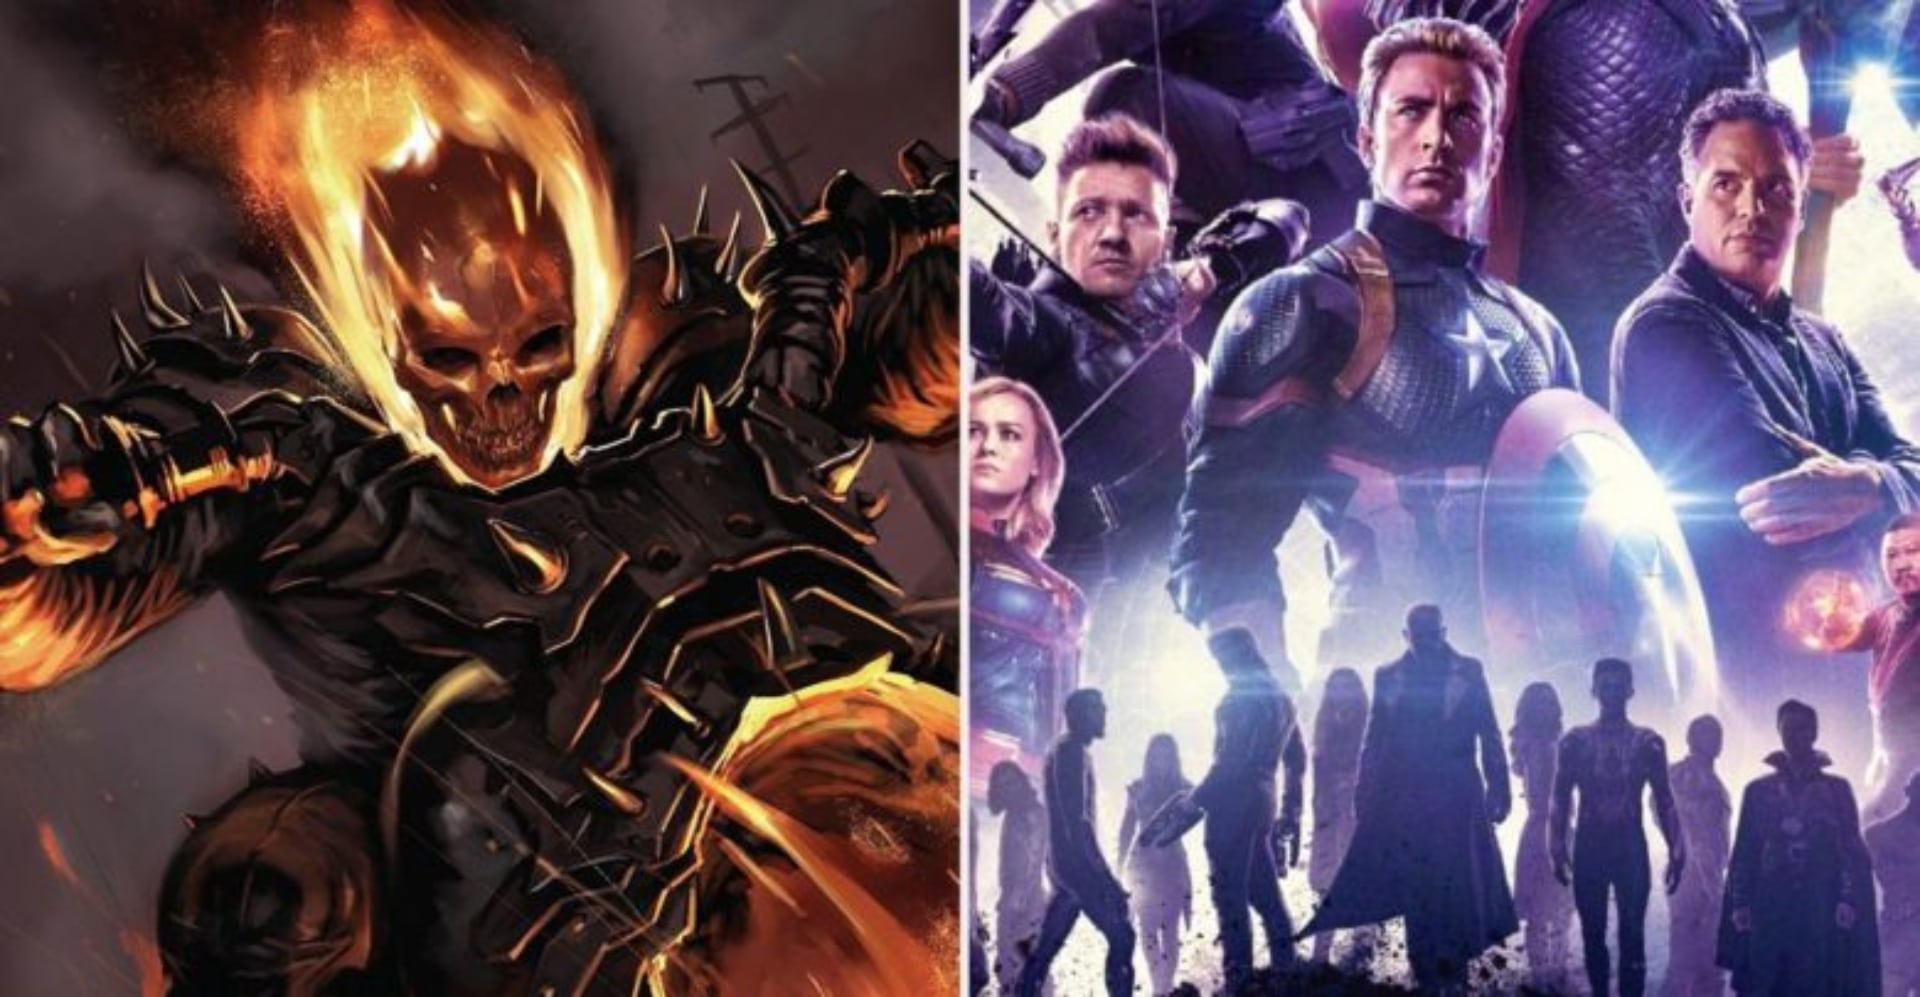 Ghost-Rider-could-beat-the-shit-out-off-the-avengers-GamersRD (1)